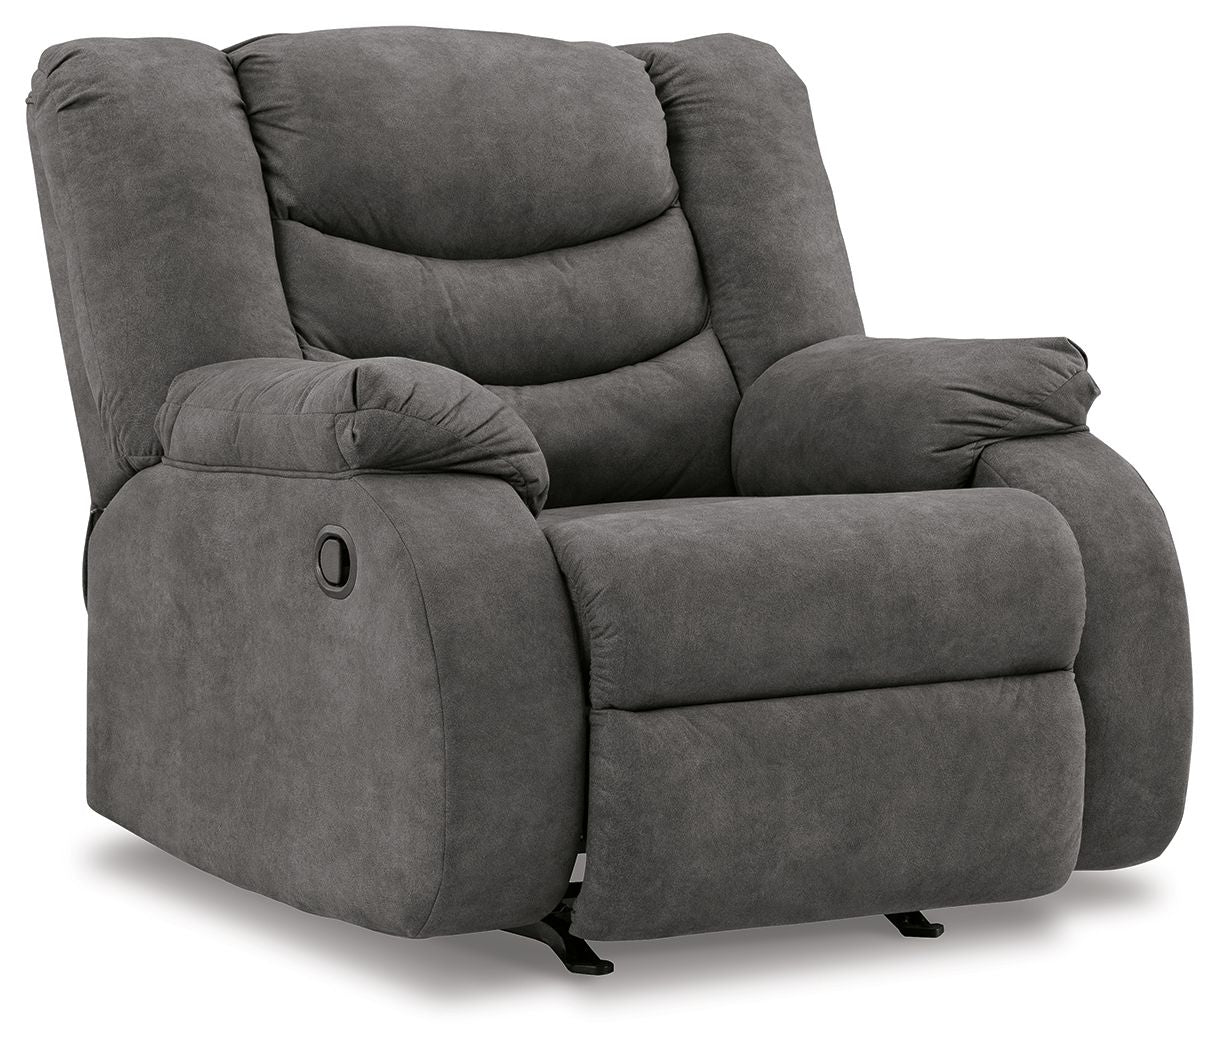 Partymate - Reclining Living Room Set - Tony's Home Furnishings